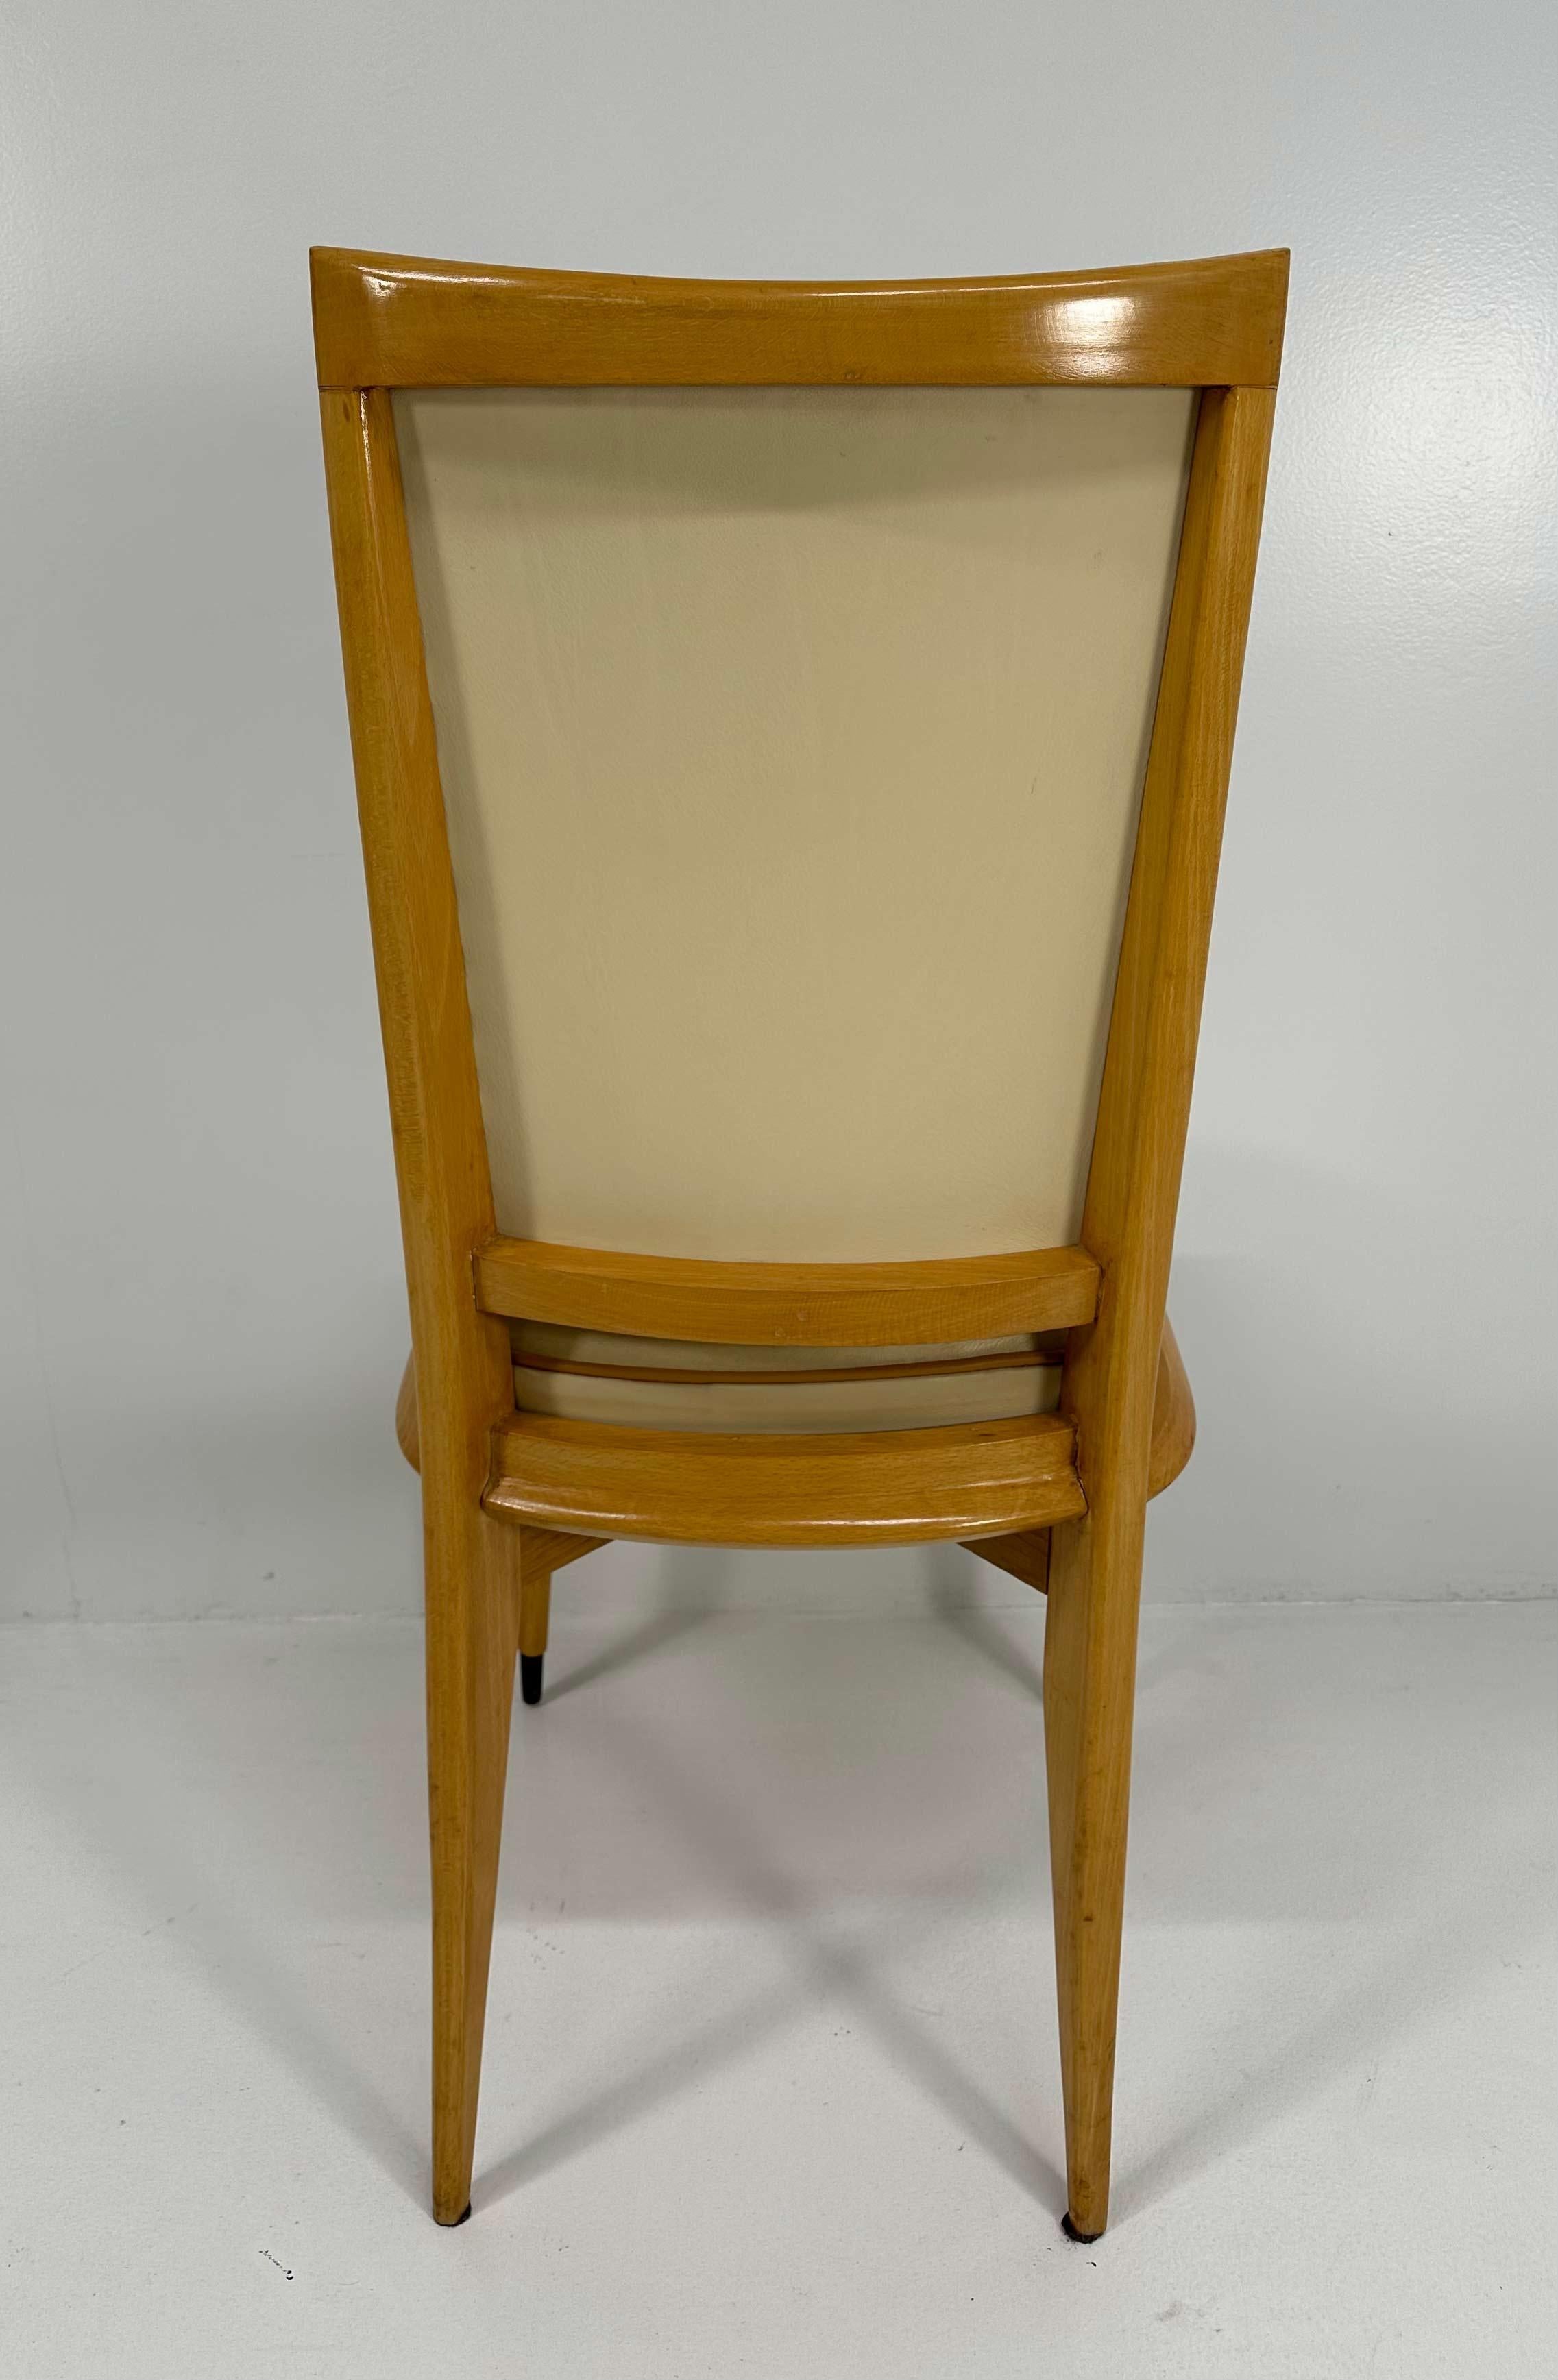 French Art Deco Set of 12 Chairs in Maple and Cream Leather, 1930s For Sale 5